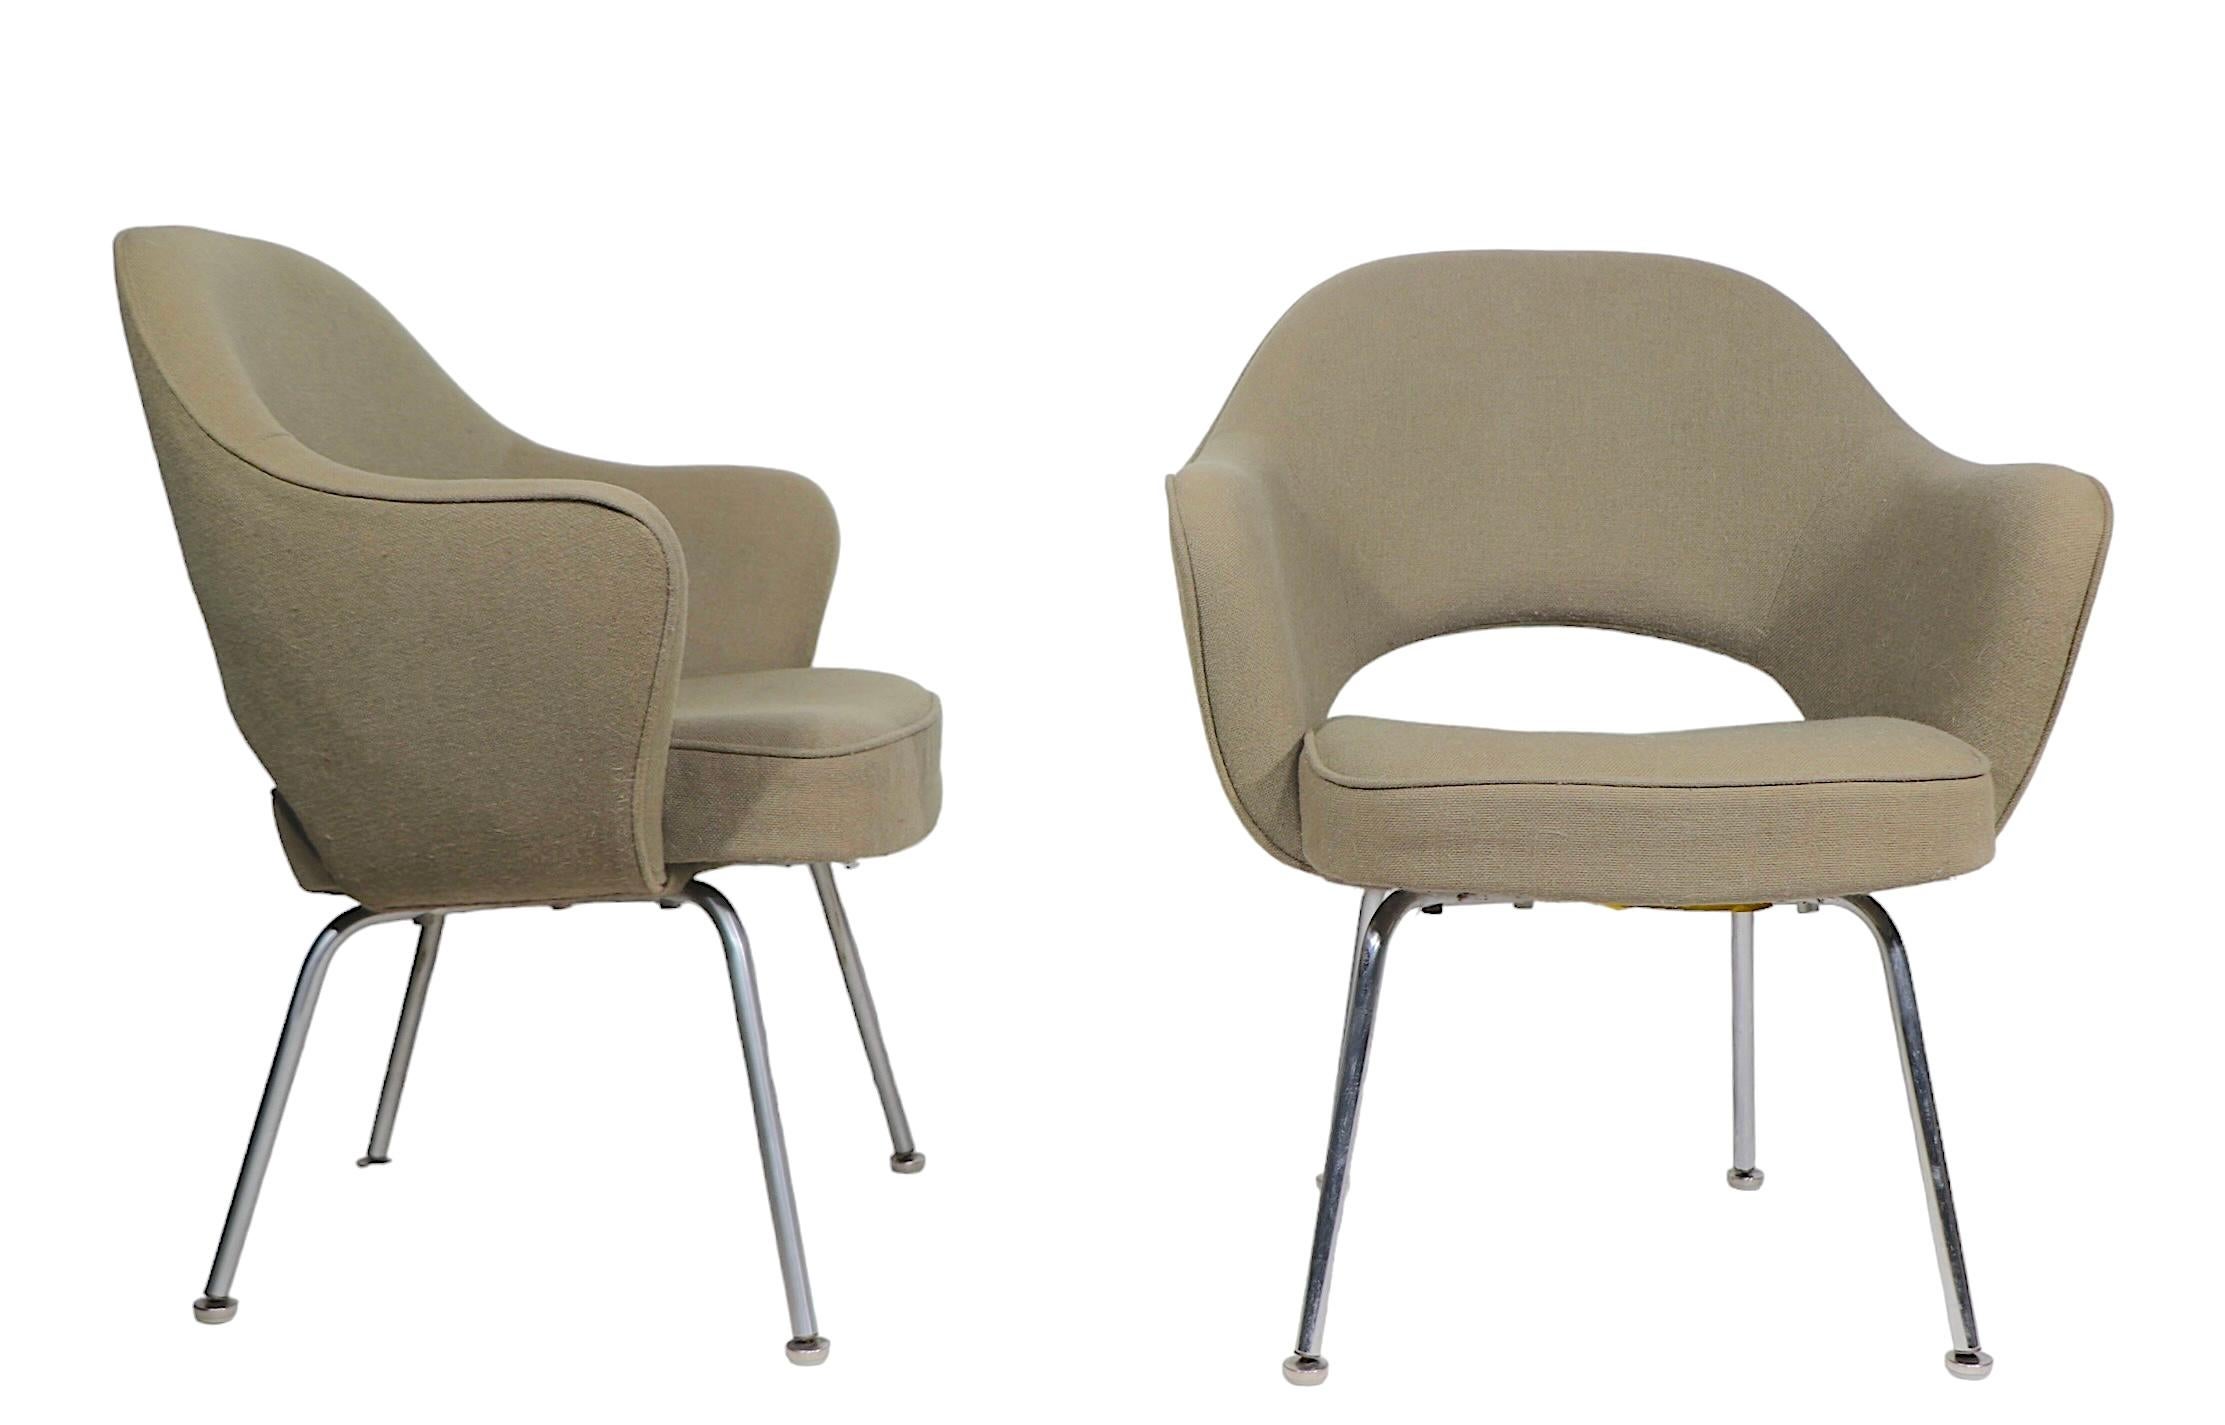 Pr. Vintage Saarinen for Knoll Executive Chairs c. 1960/70's For Sale 4